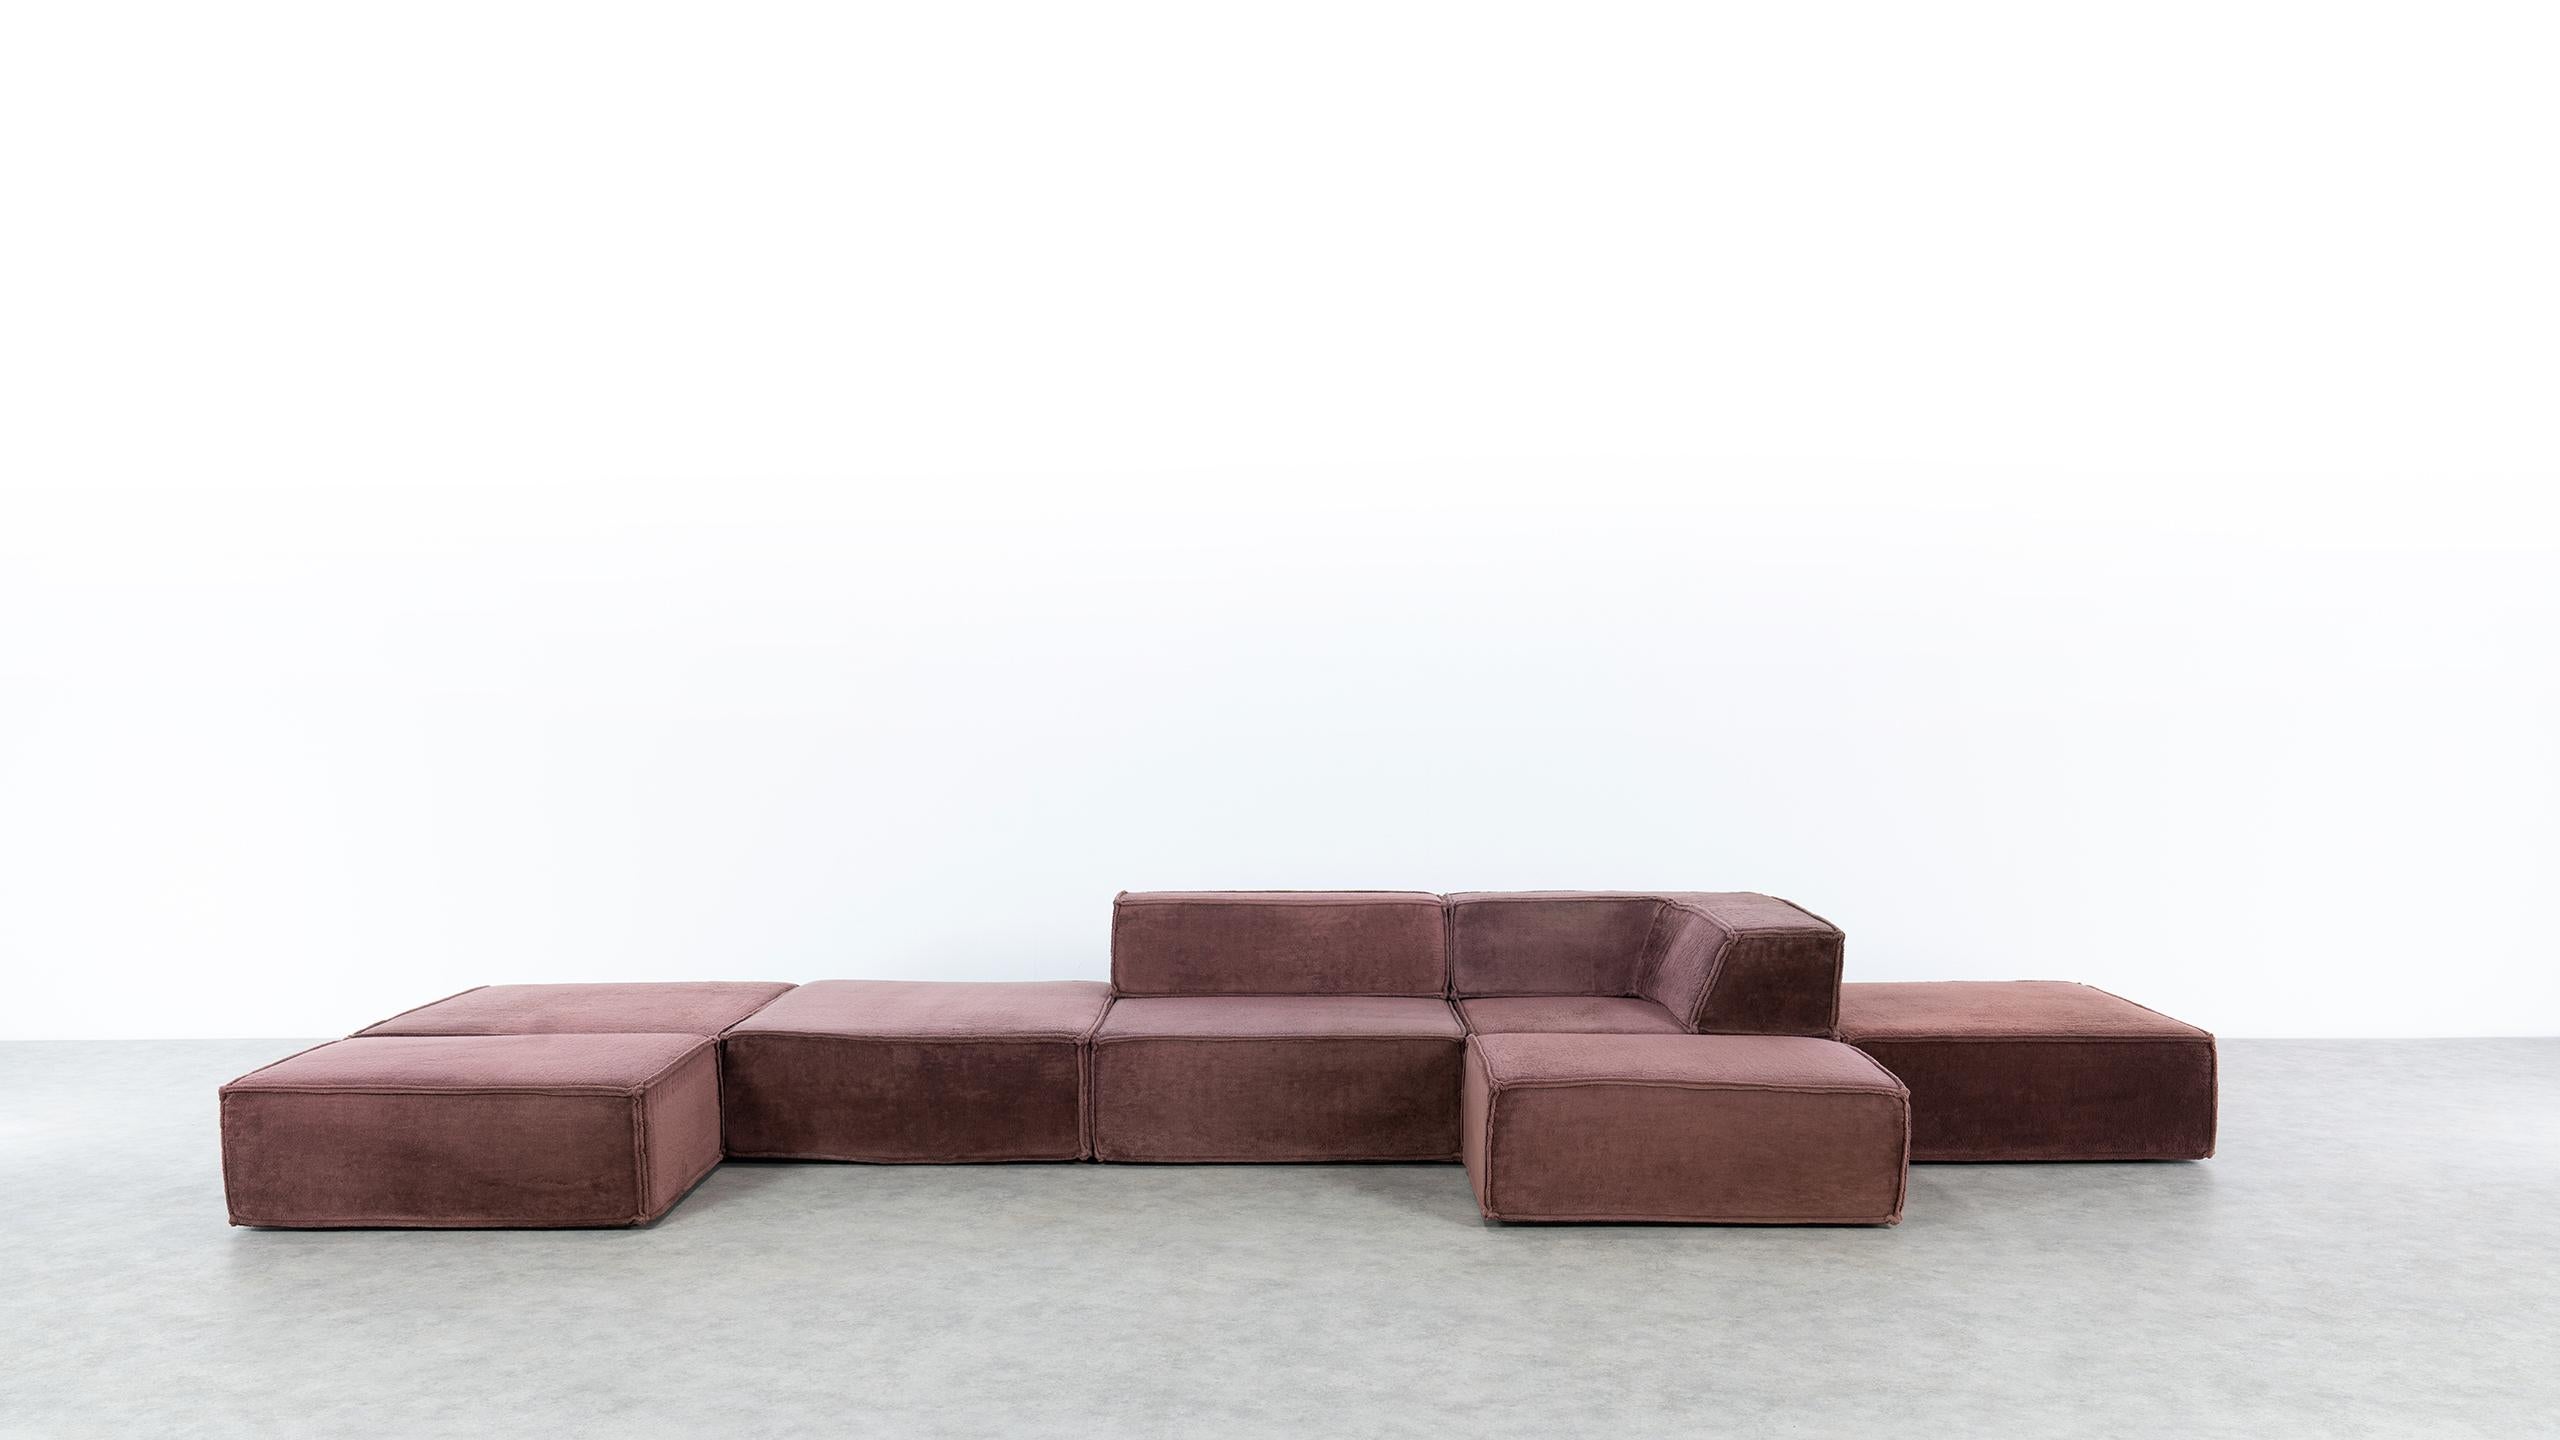 COR Trio Modular Sofa, Giant Landscape in Brown, 1972 by Team Form AG, Swiss 4